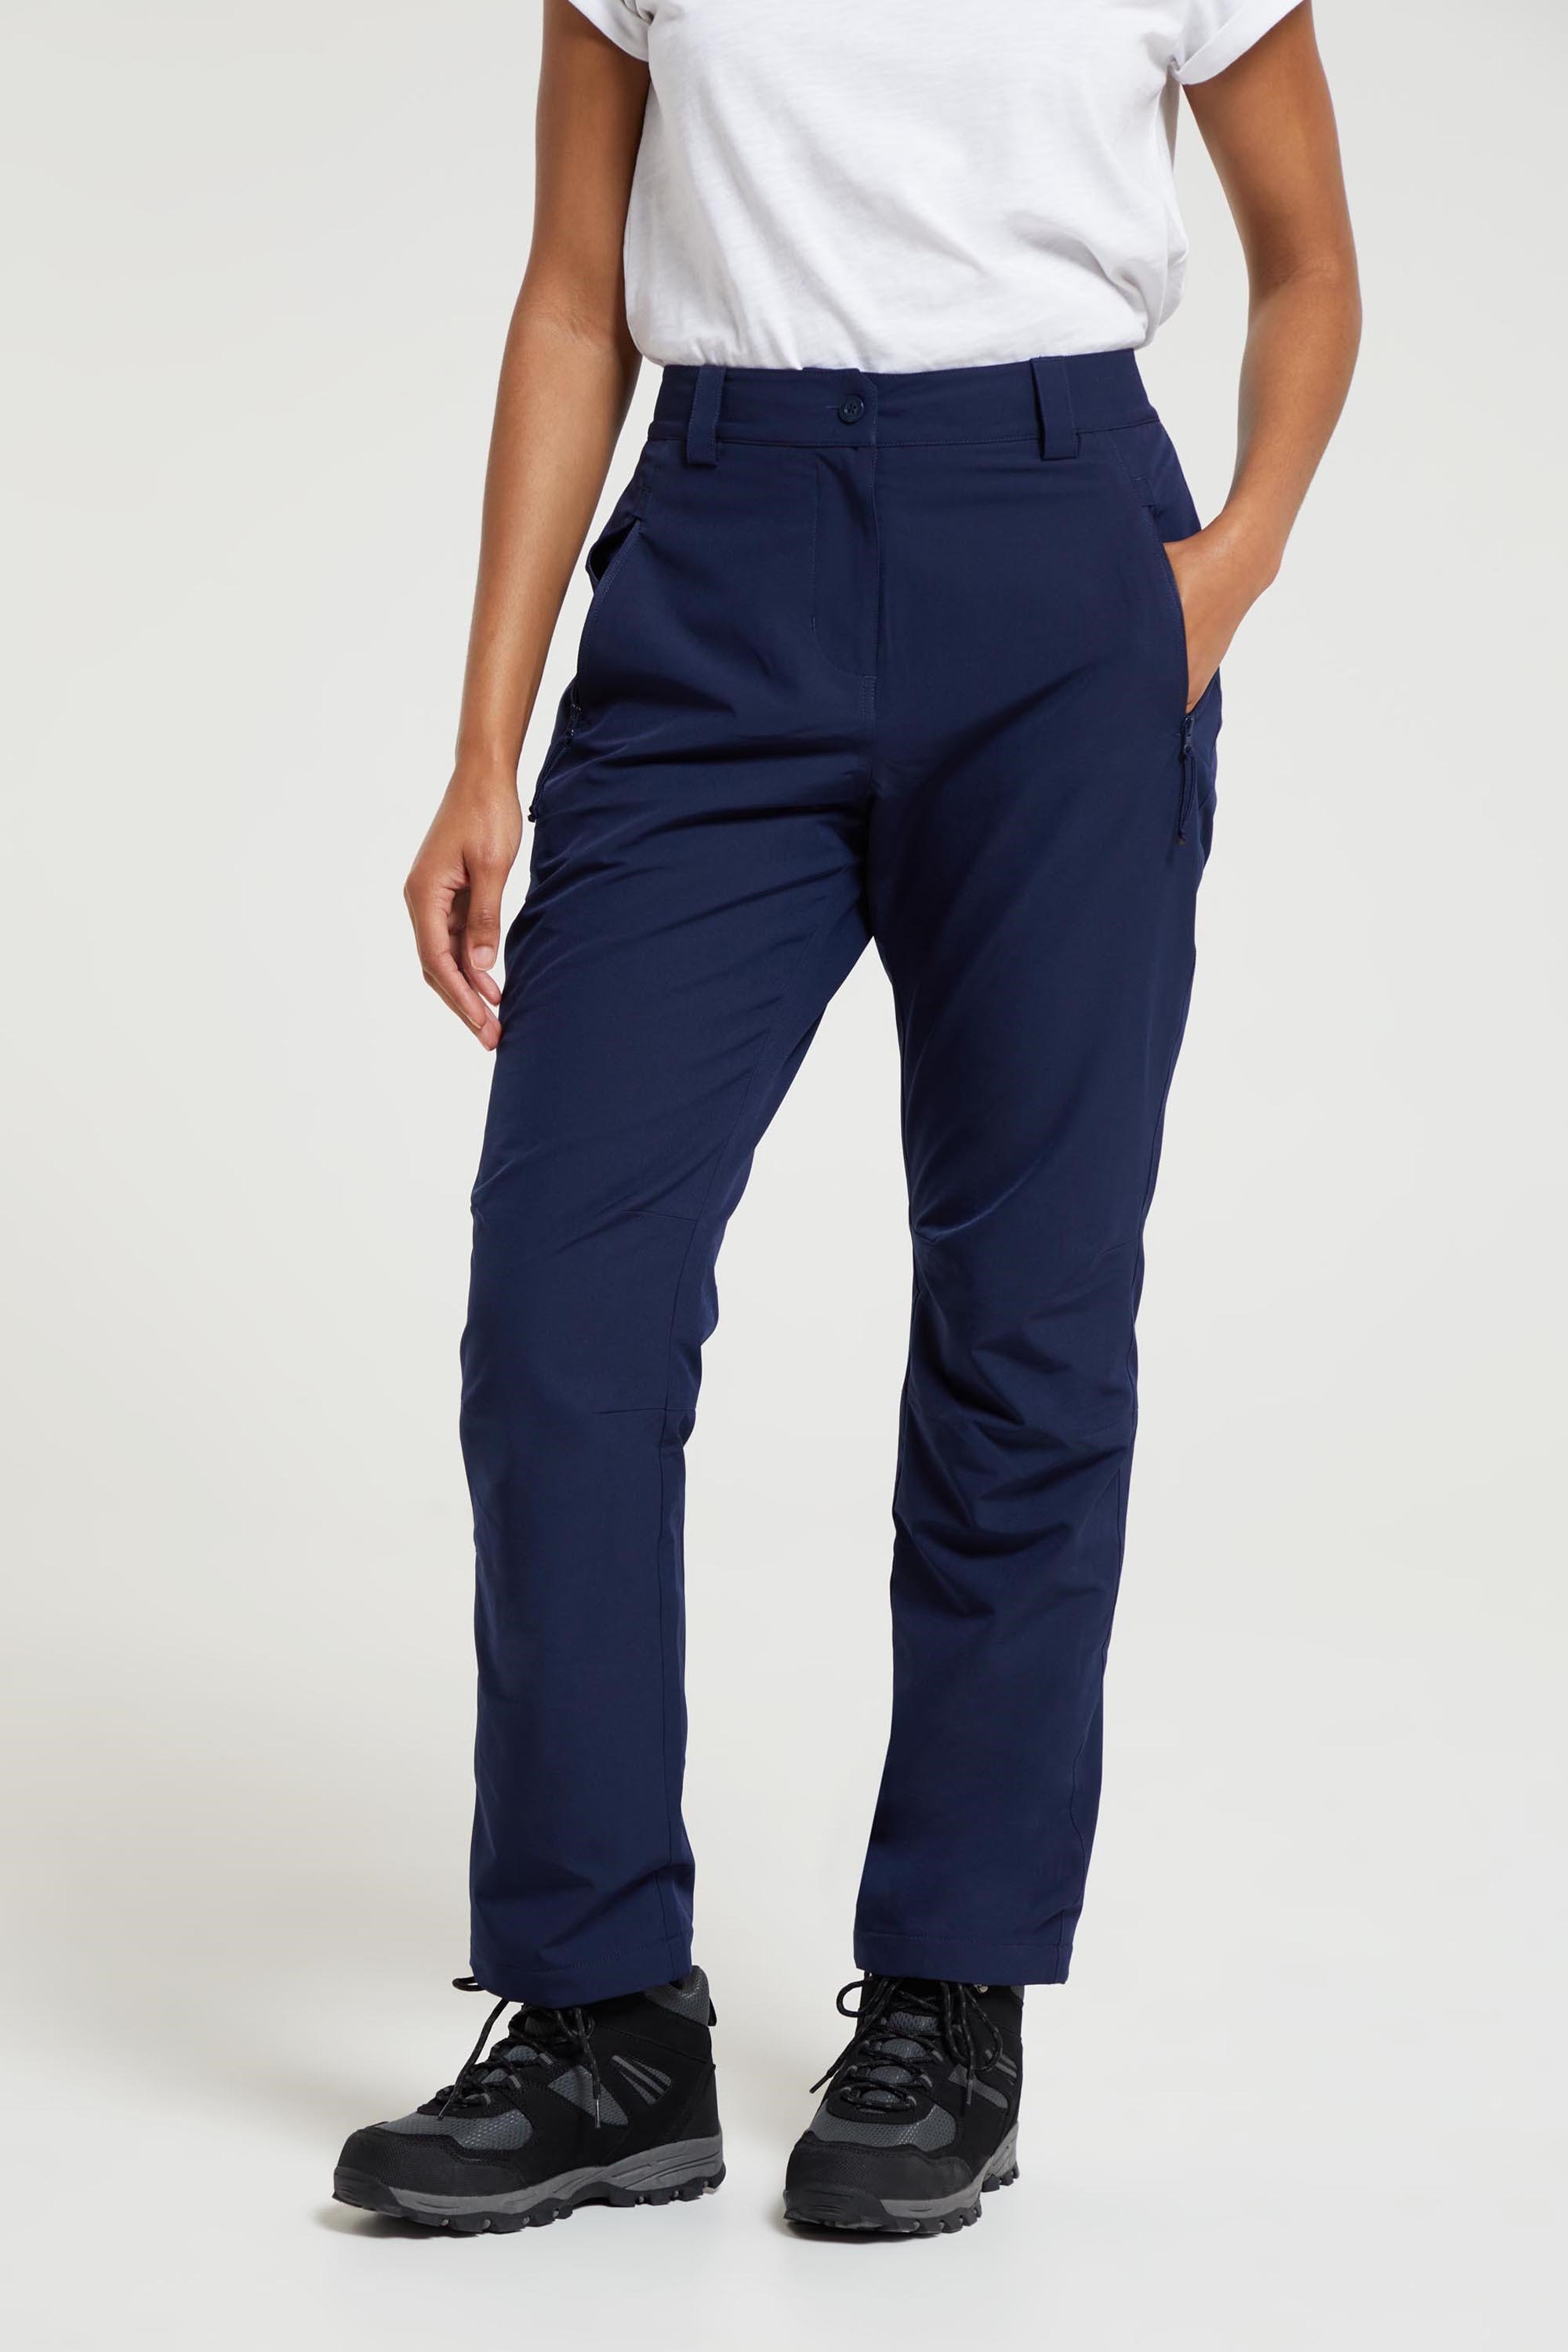 Arctic II Fleece Lined Stretch Womens Trousers Navy